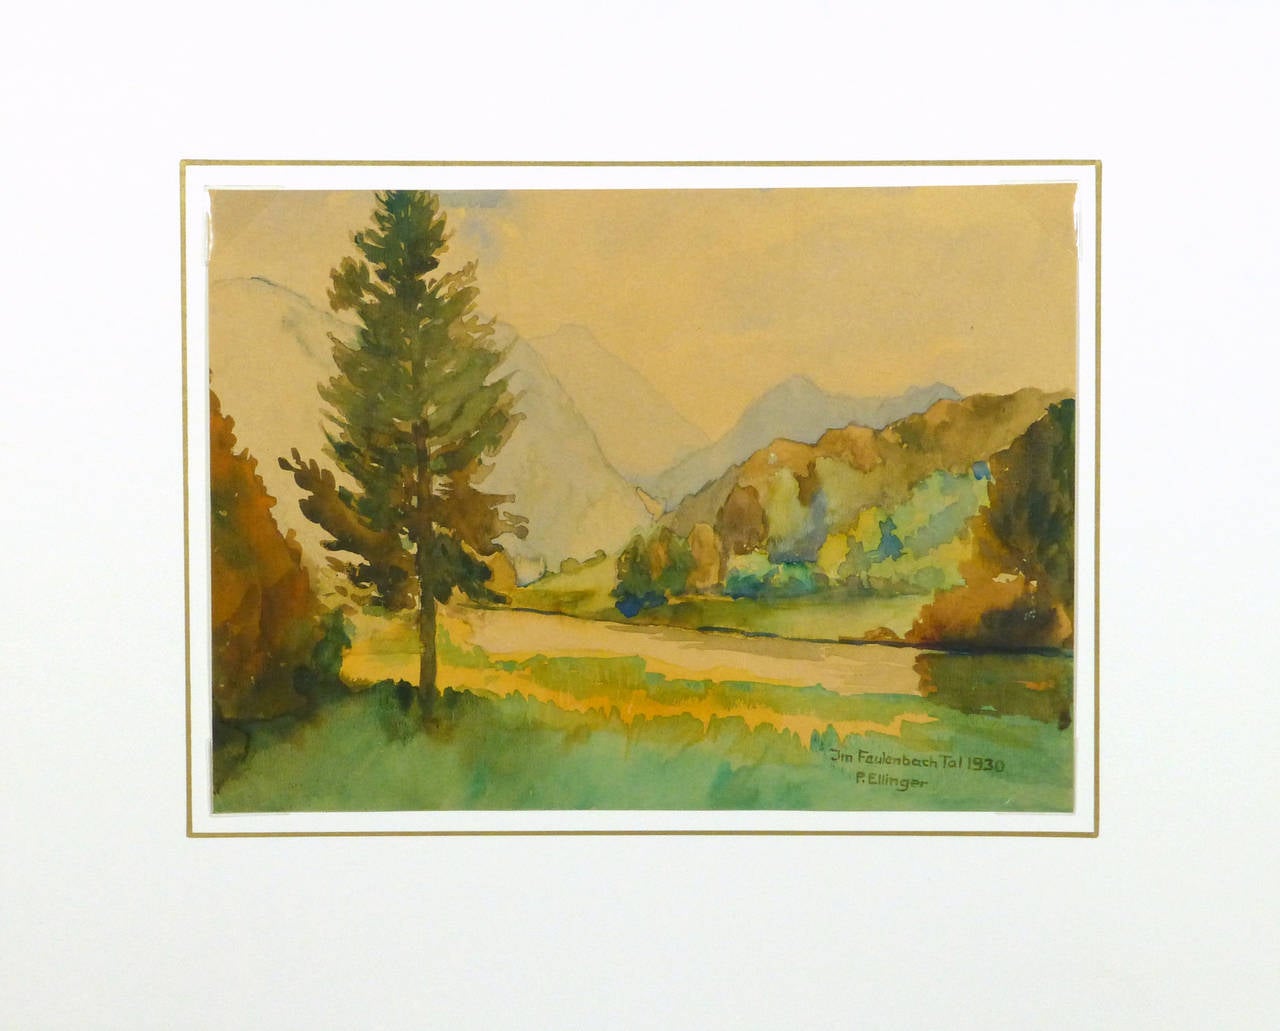 Simply serene watercolor painting of a peaceful scene of the Faulenbach river in Germany by Paul Ellinger, 1930. Signed, titled and dated lower right.

Original one-of-a-kind vintage work of art on paper displayed on a white mat with a gold border